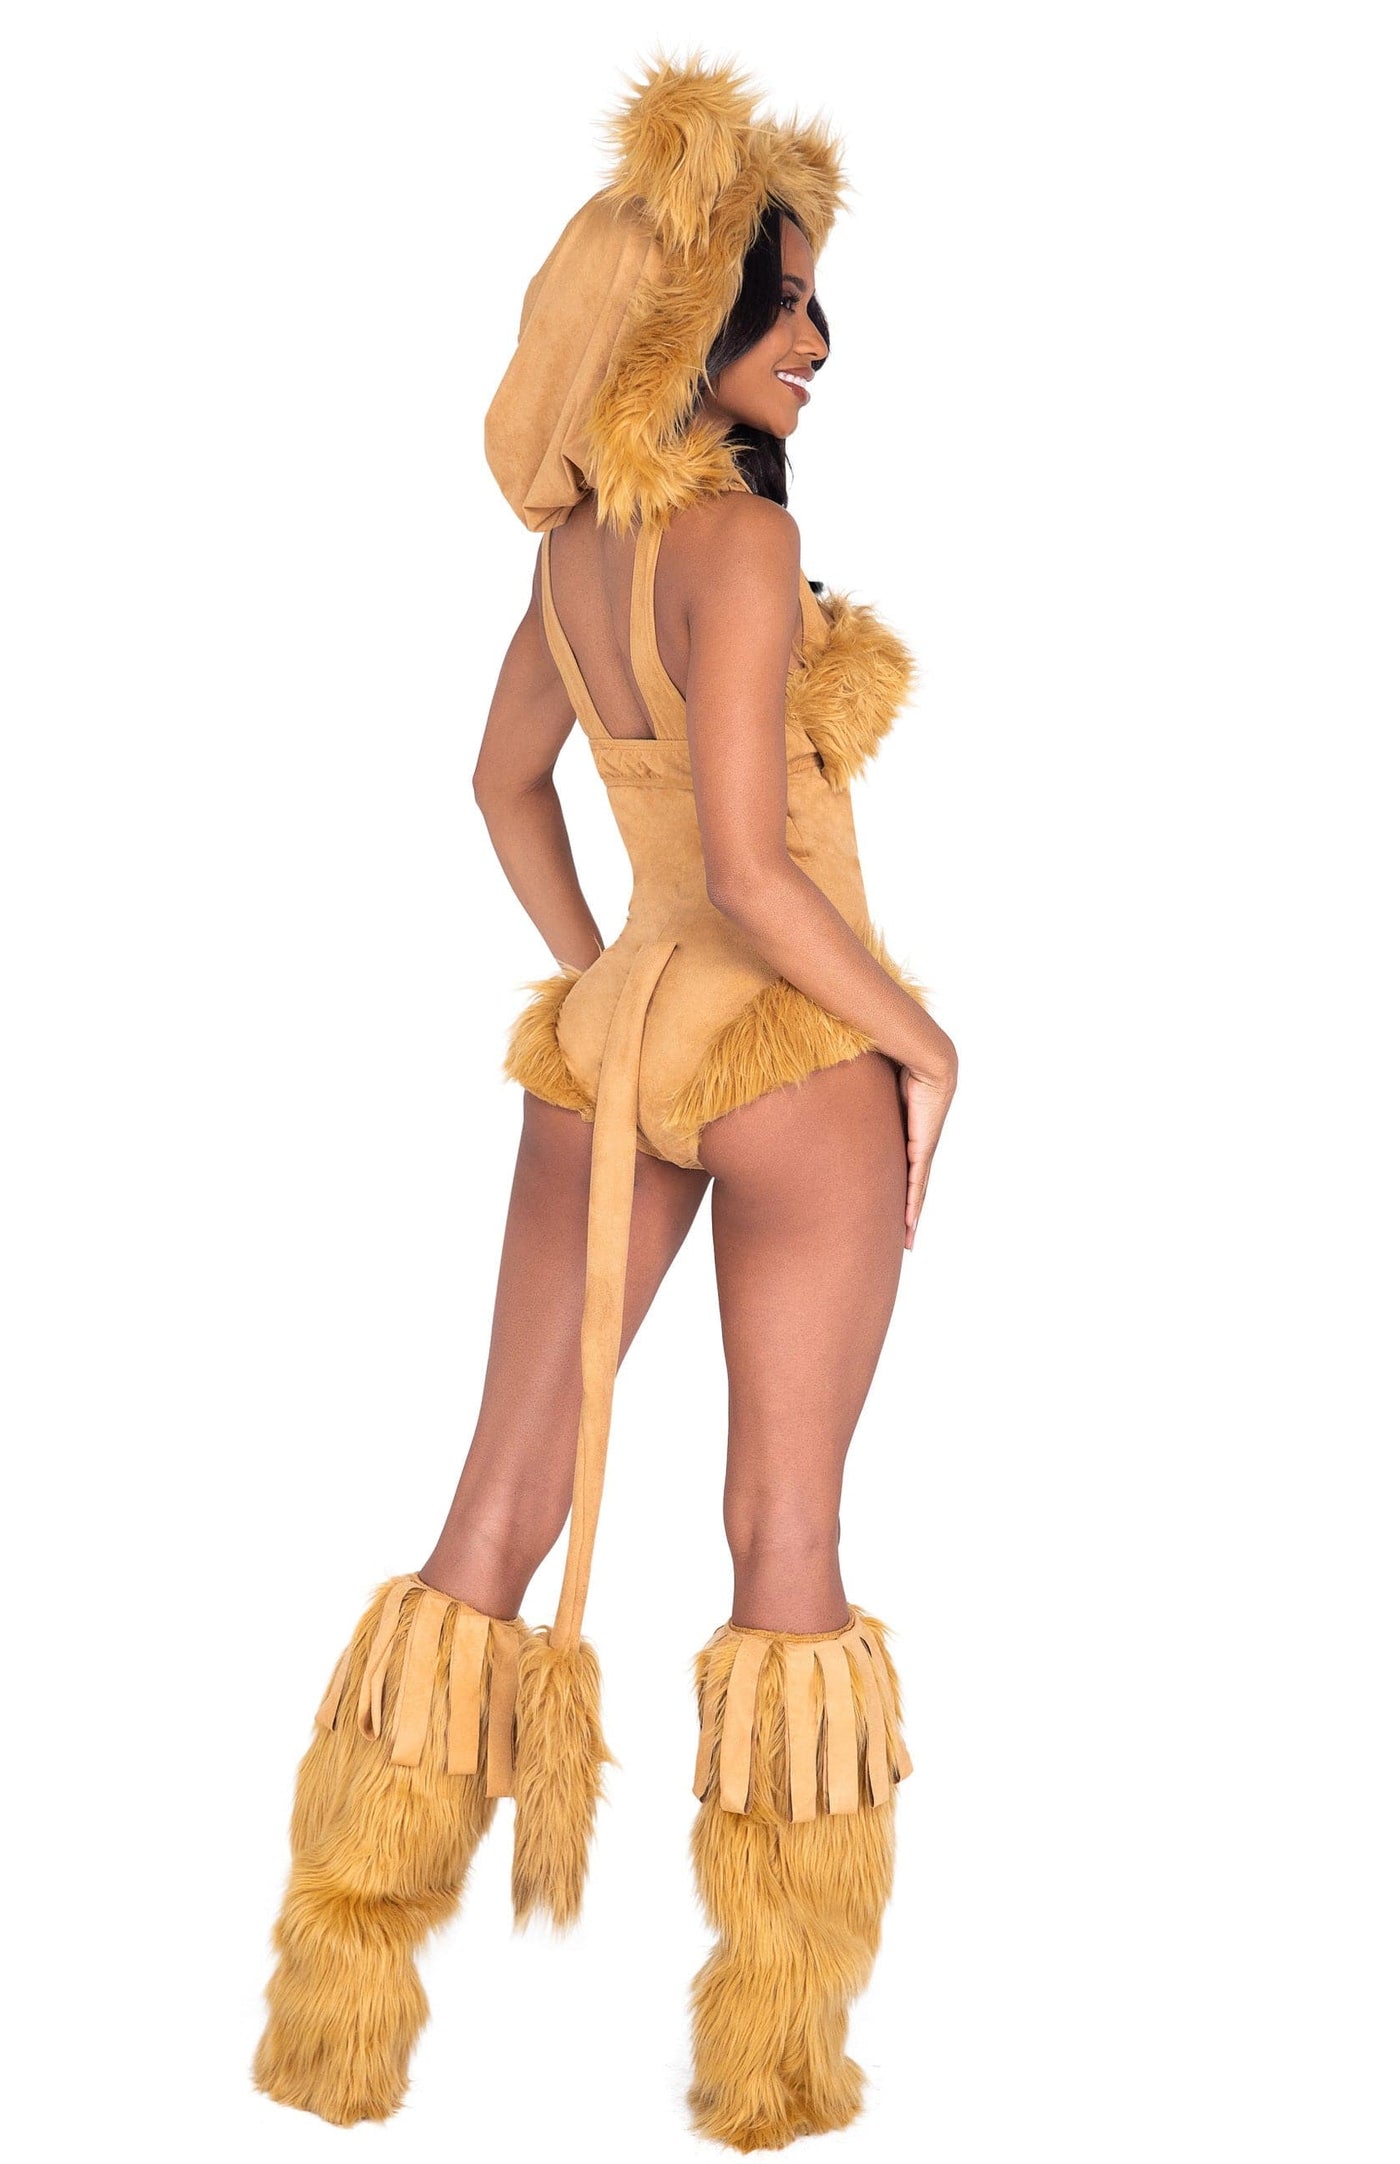 2pc. Queen of the Jungle Lion Women's Costume - For Love of Lingerie